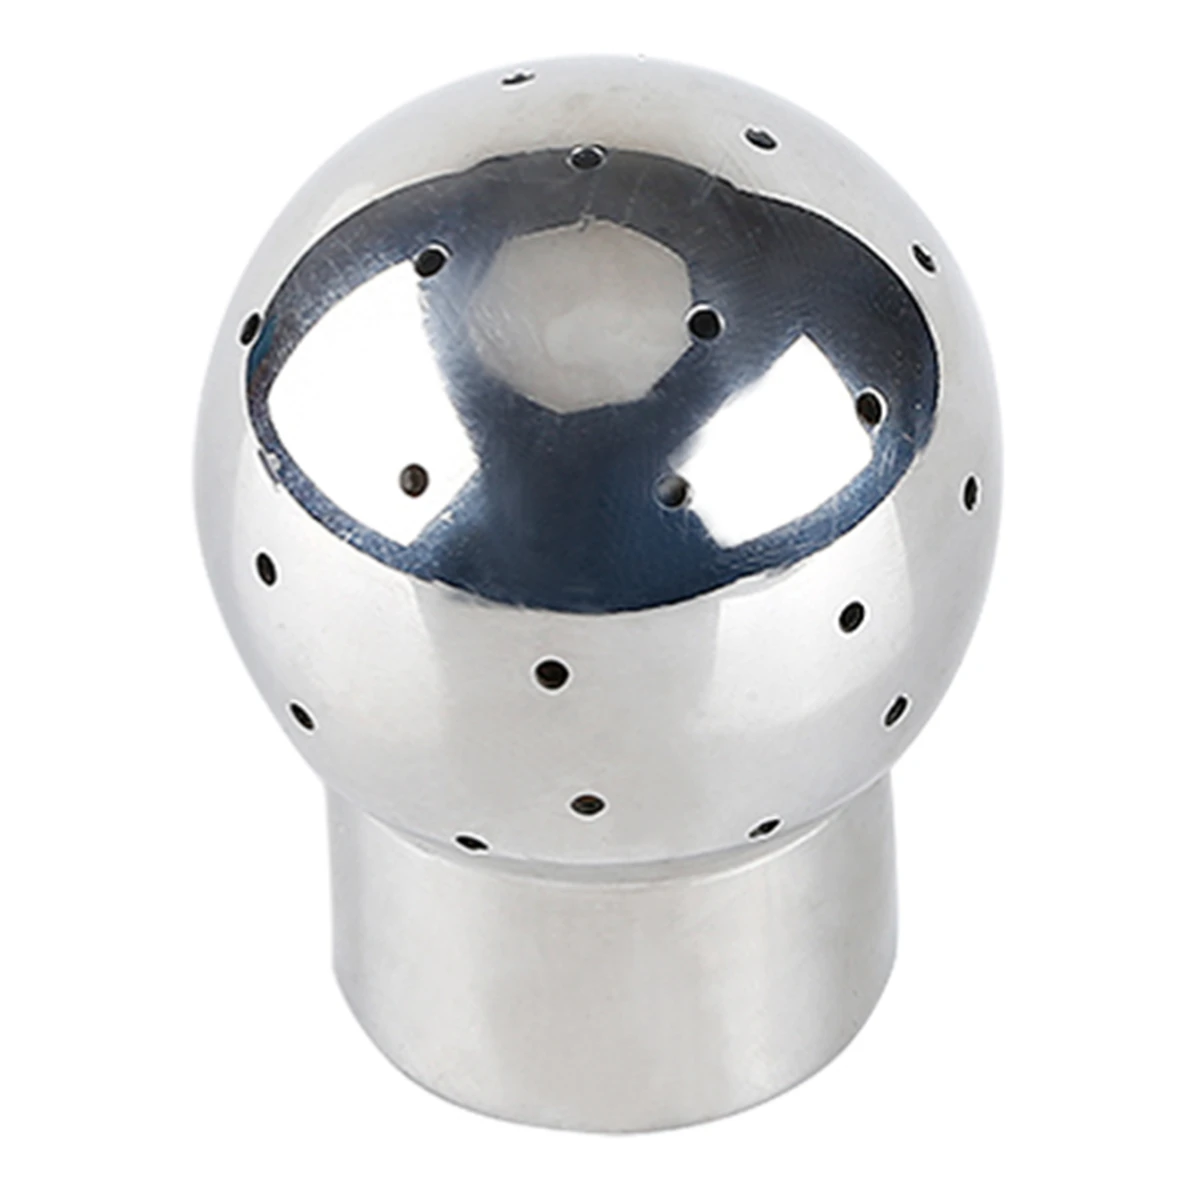 

DN50 2" BSP Stainless Steel 304 Female Thread Fixed Tank Cleaning Head Sanitary Rotary Spray Ball